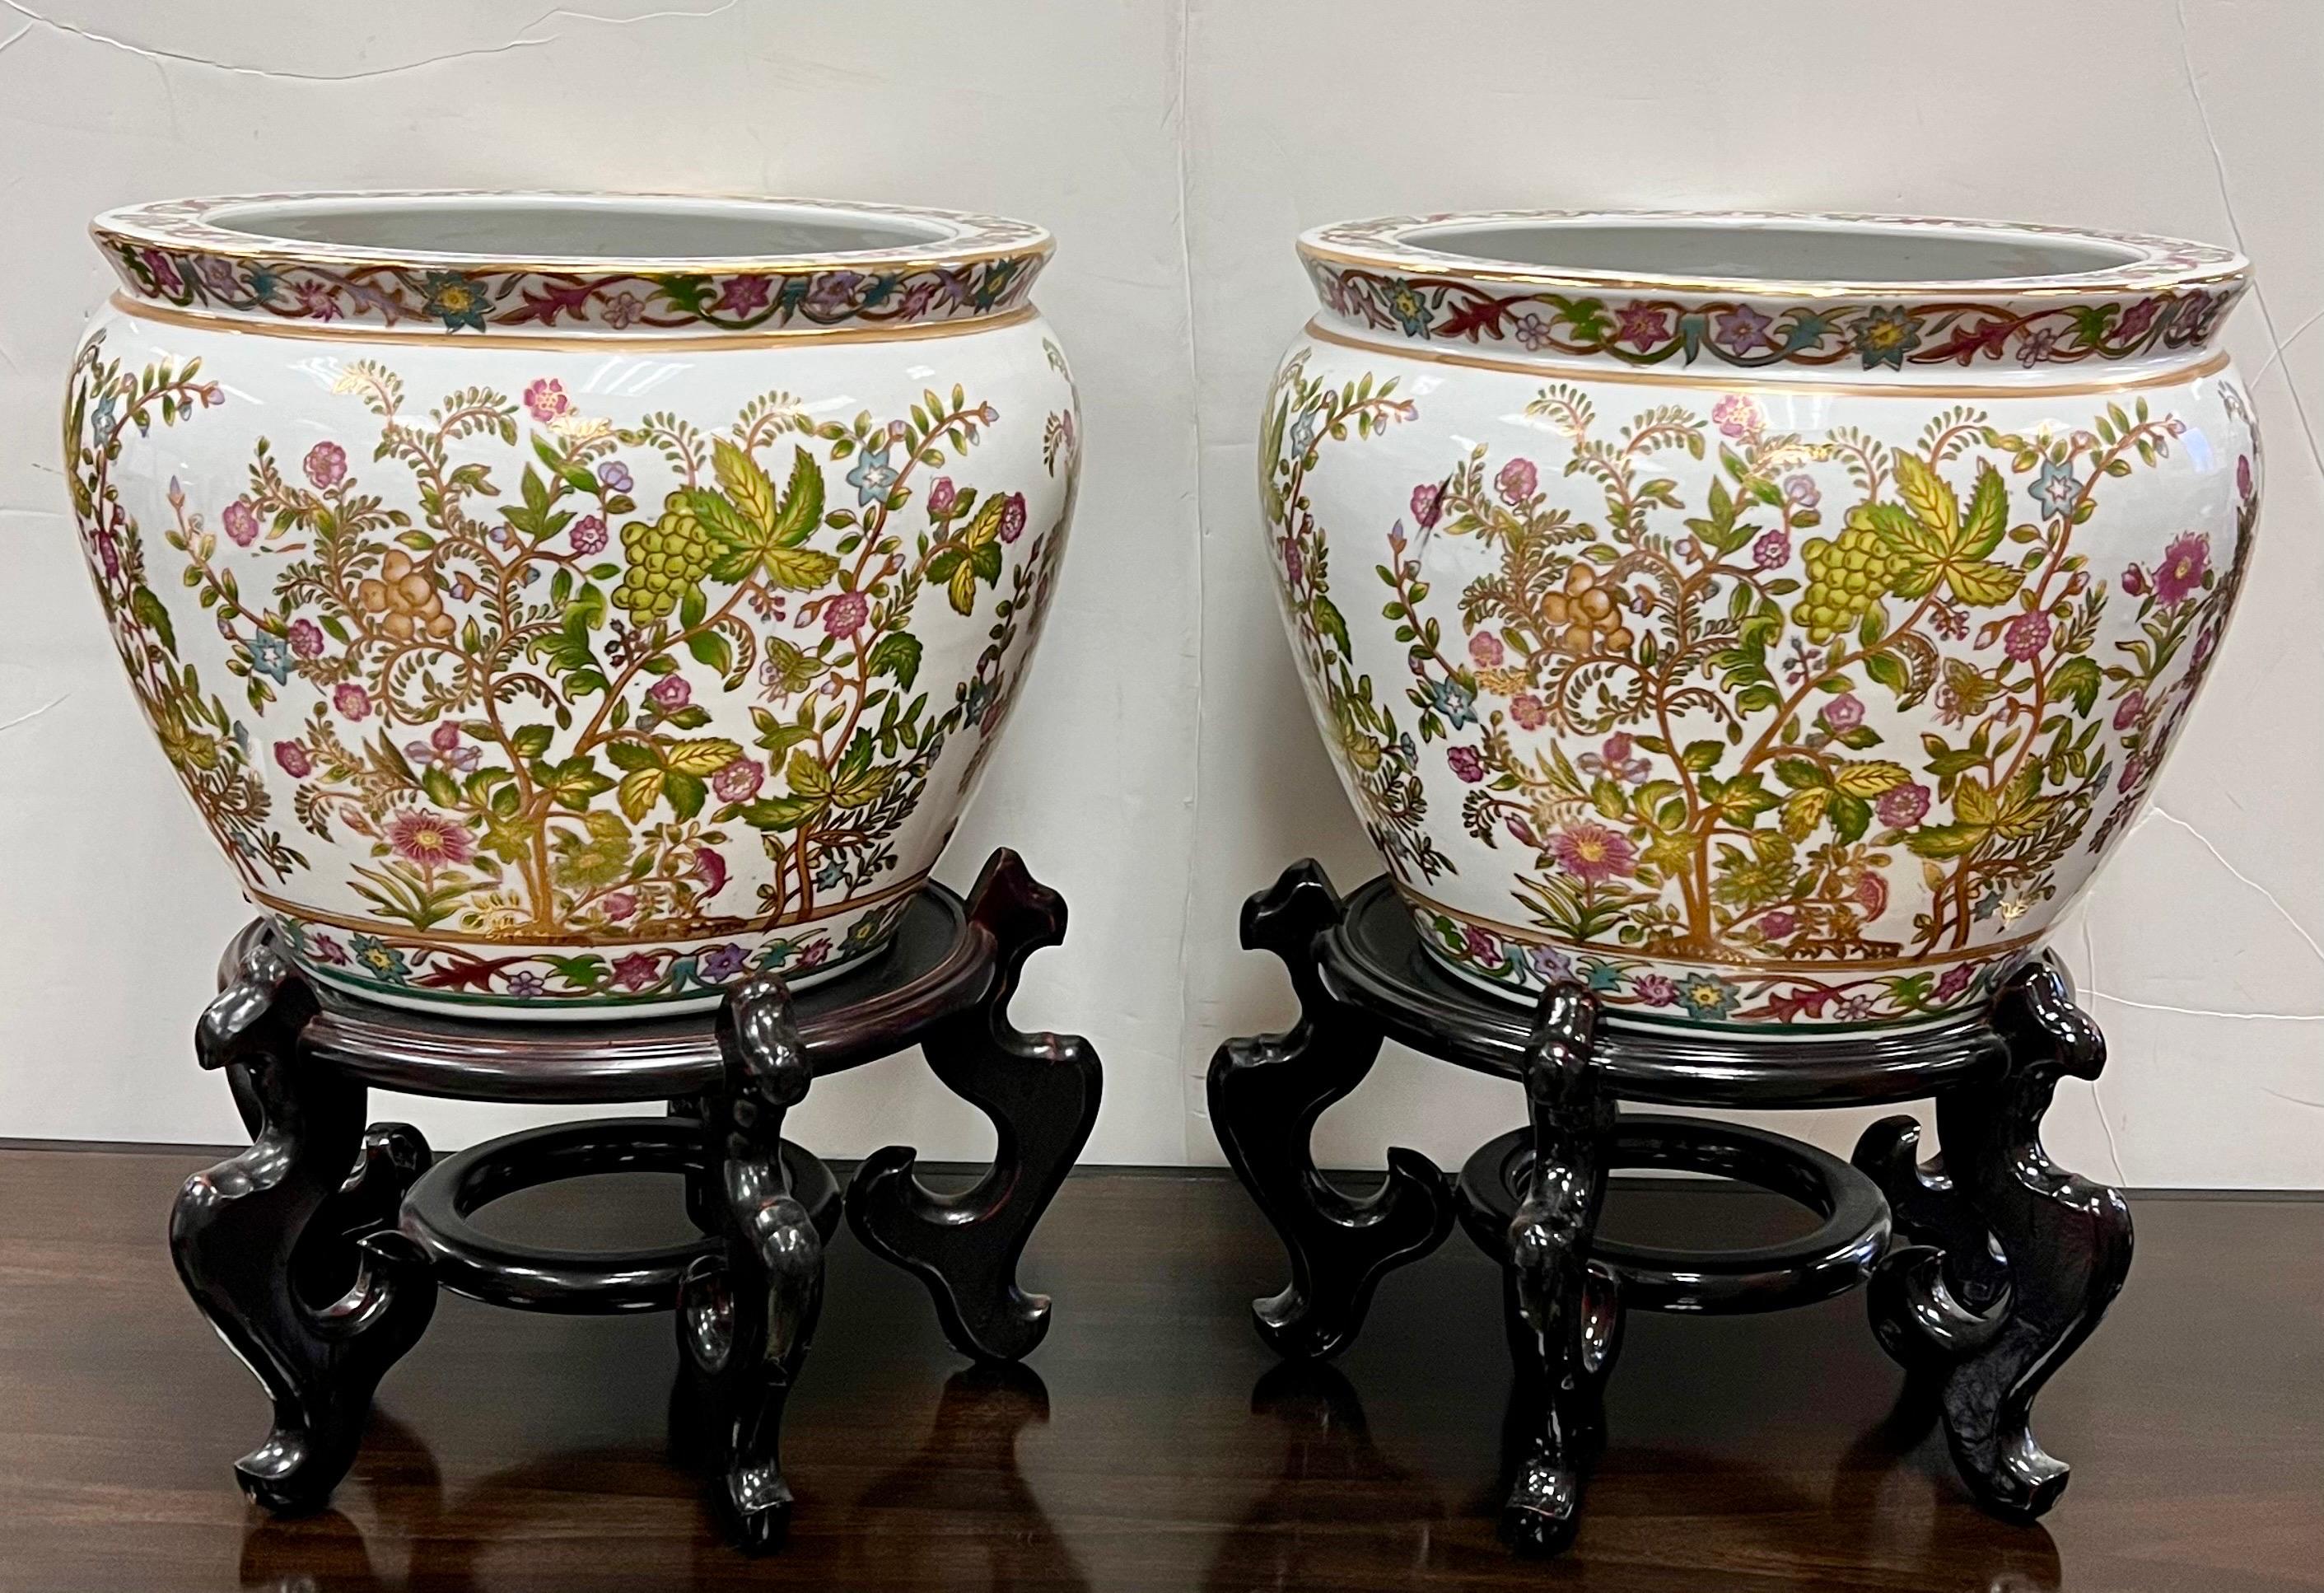 Magnificent pair of Chinese porcelain jardinieres fishbowls planters in a pink and green floral motif.  On carved wooden pedestal bases.